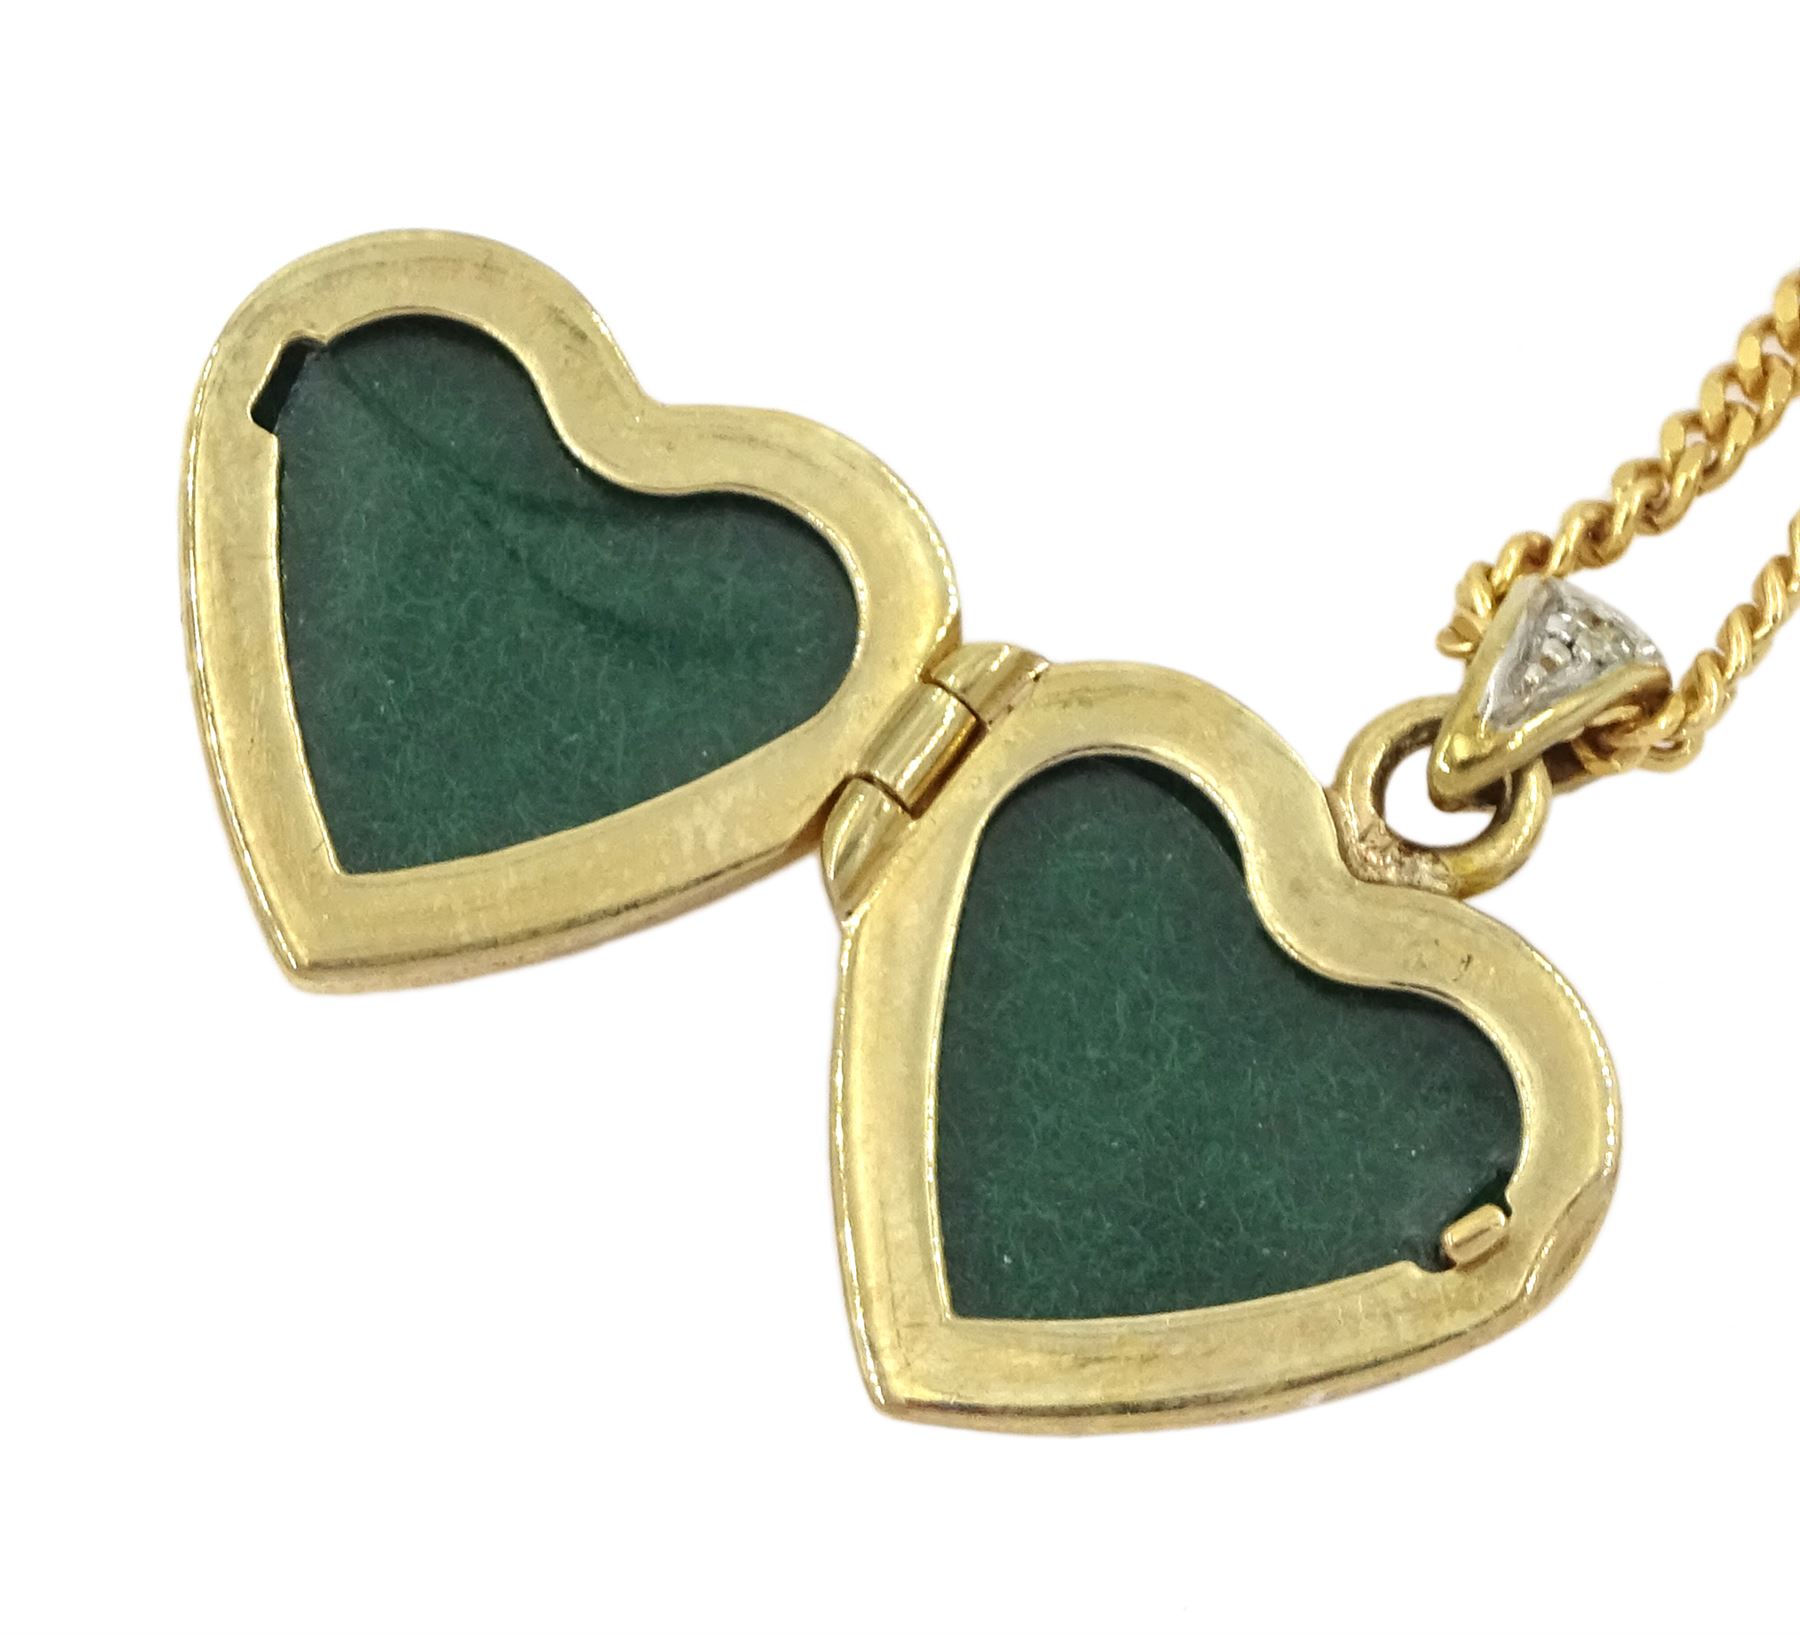 9ct gold heart pendant necklace - Image 3 of 3